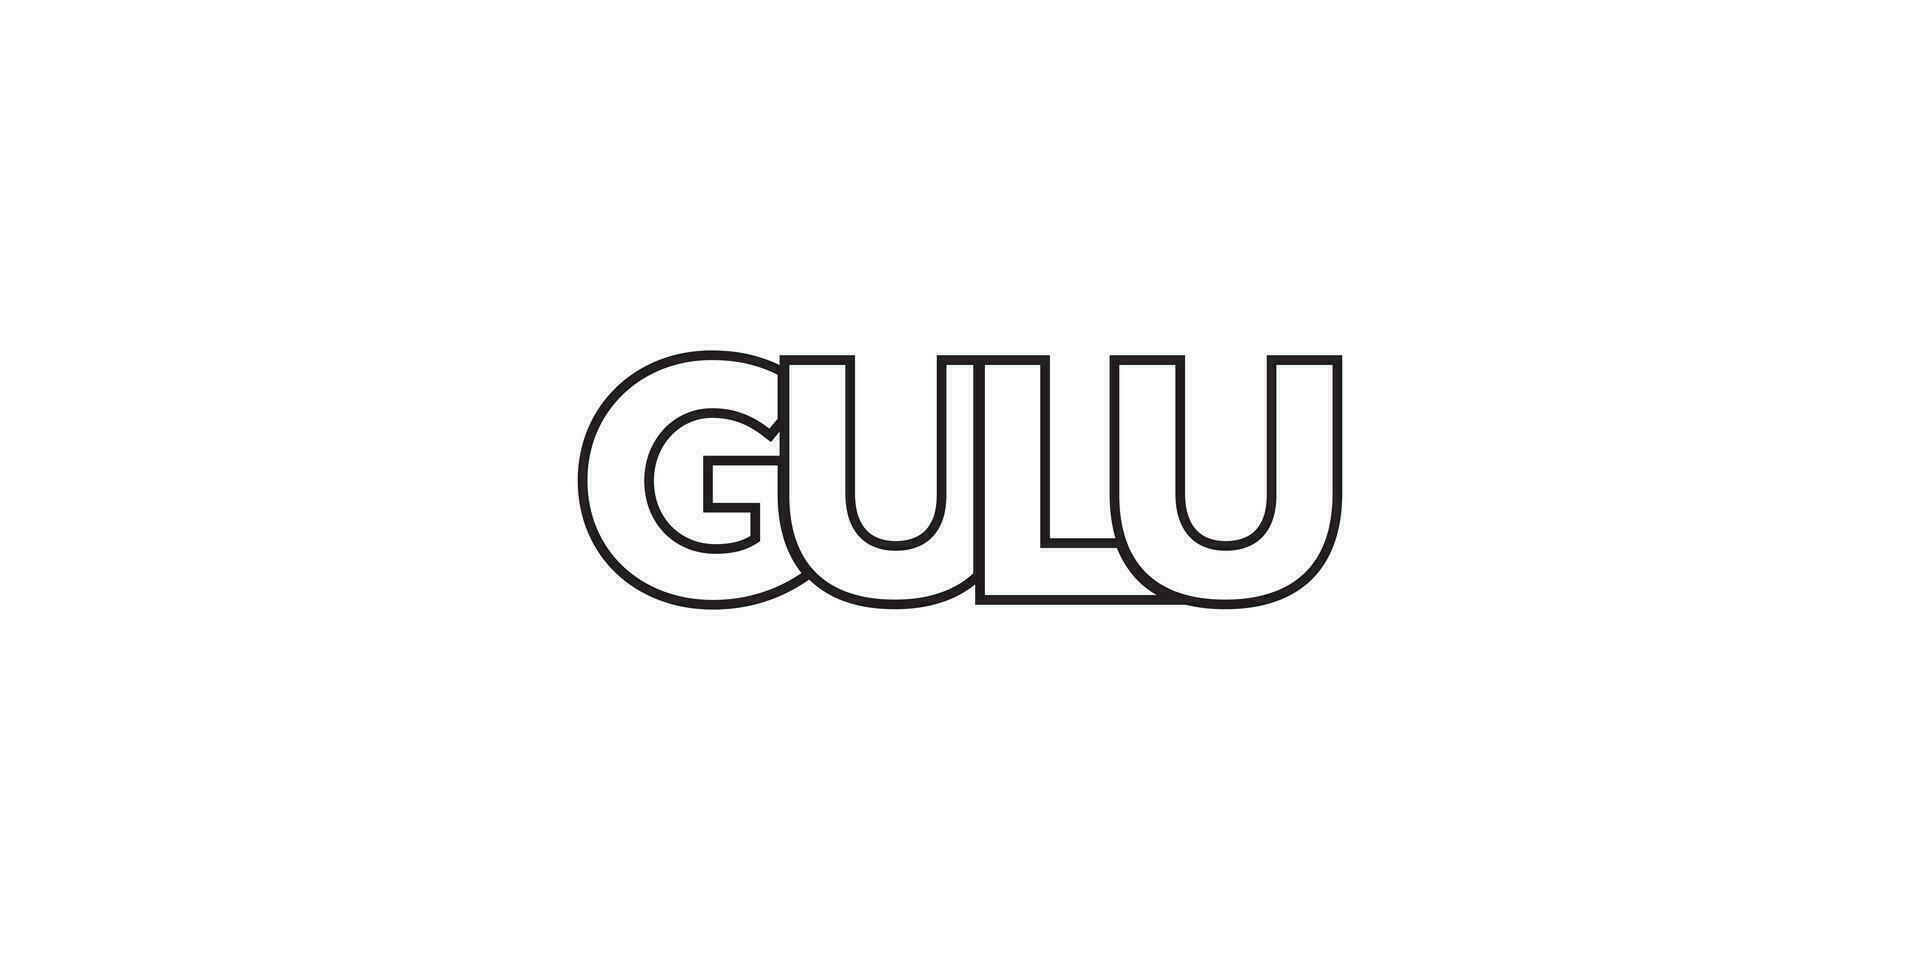 Gulu in the Uganda emblem. The design features a geometric style, vector illustration with bold typography in a modern font. The graphic slogan lettering.